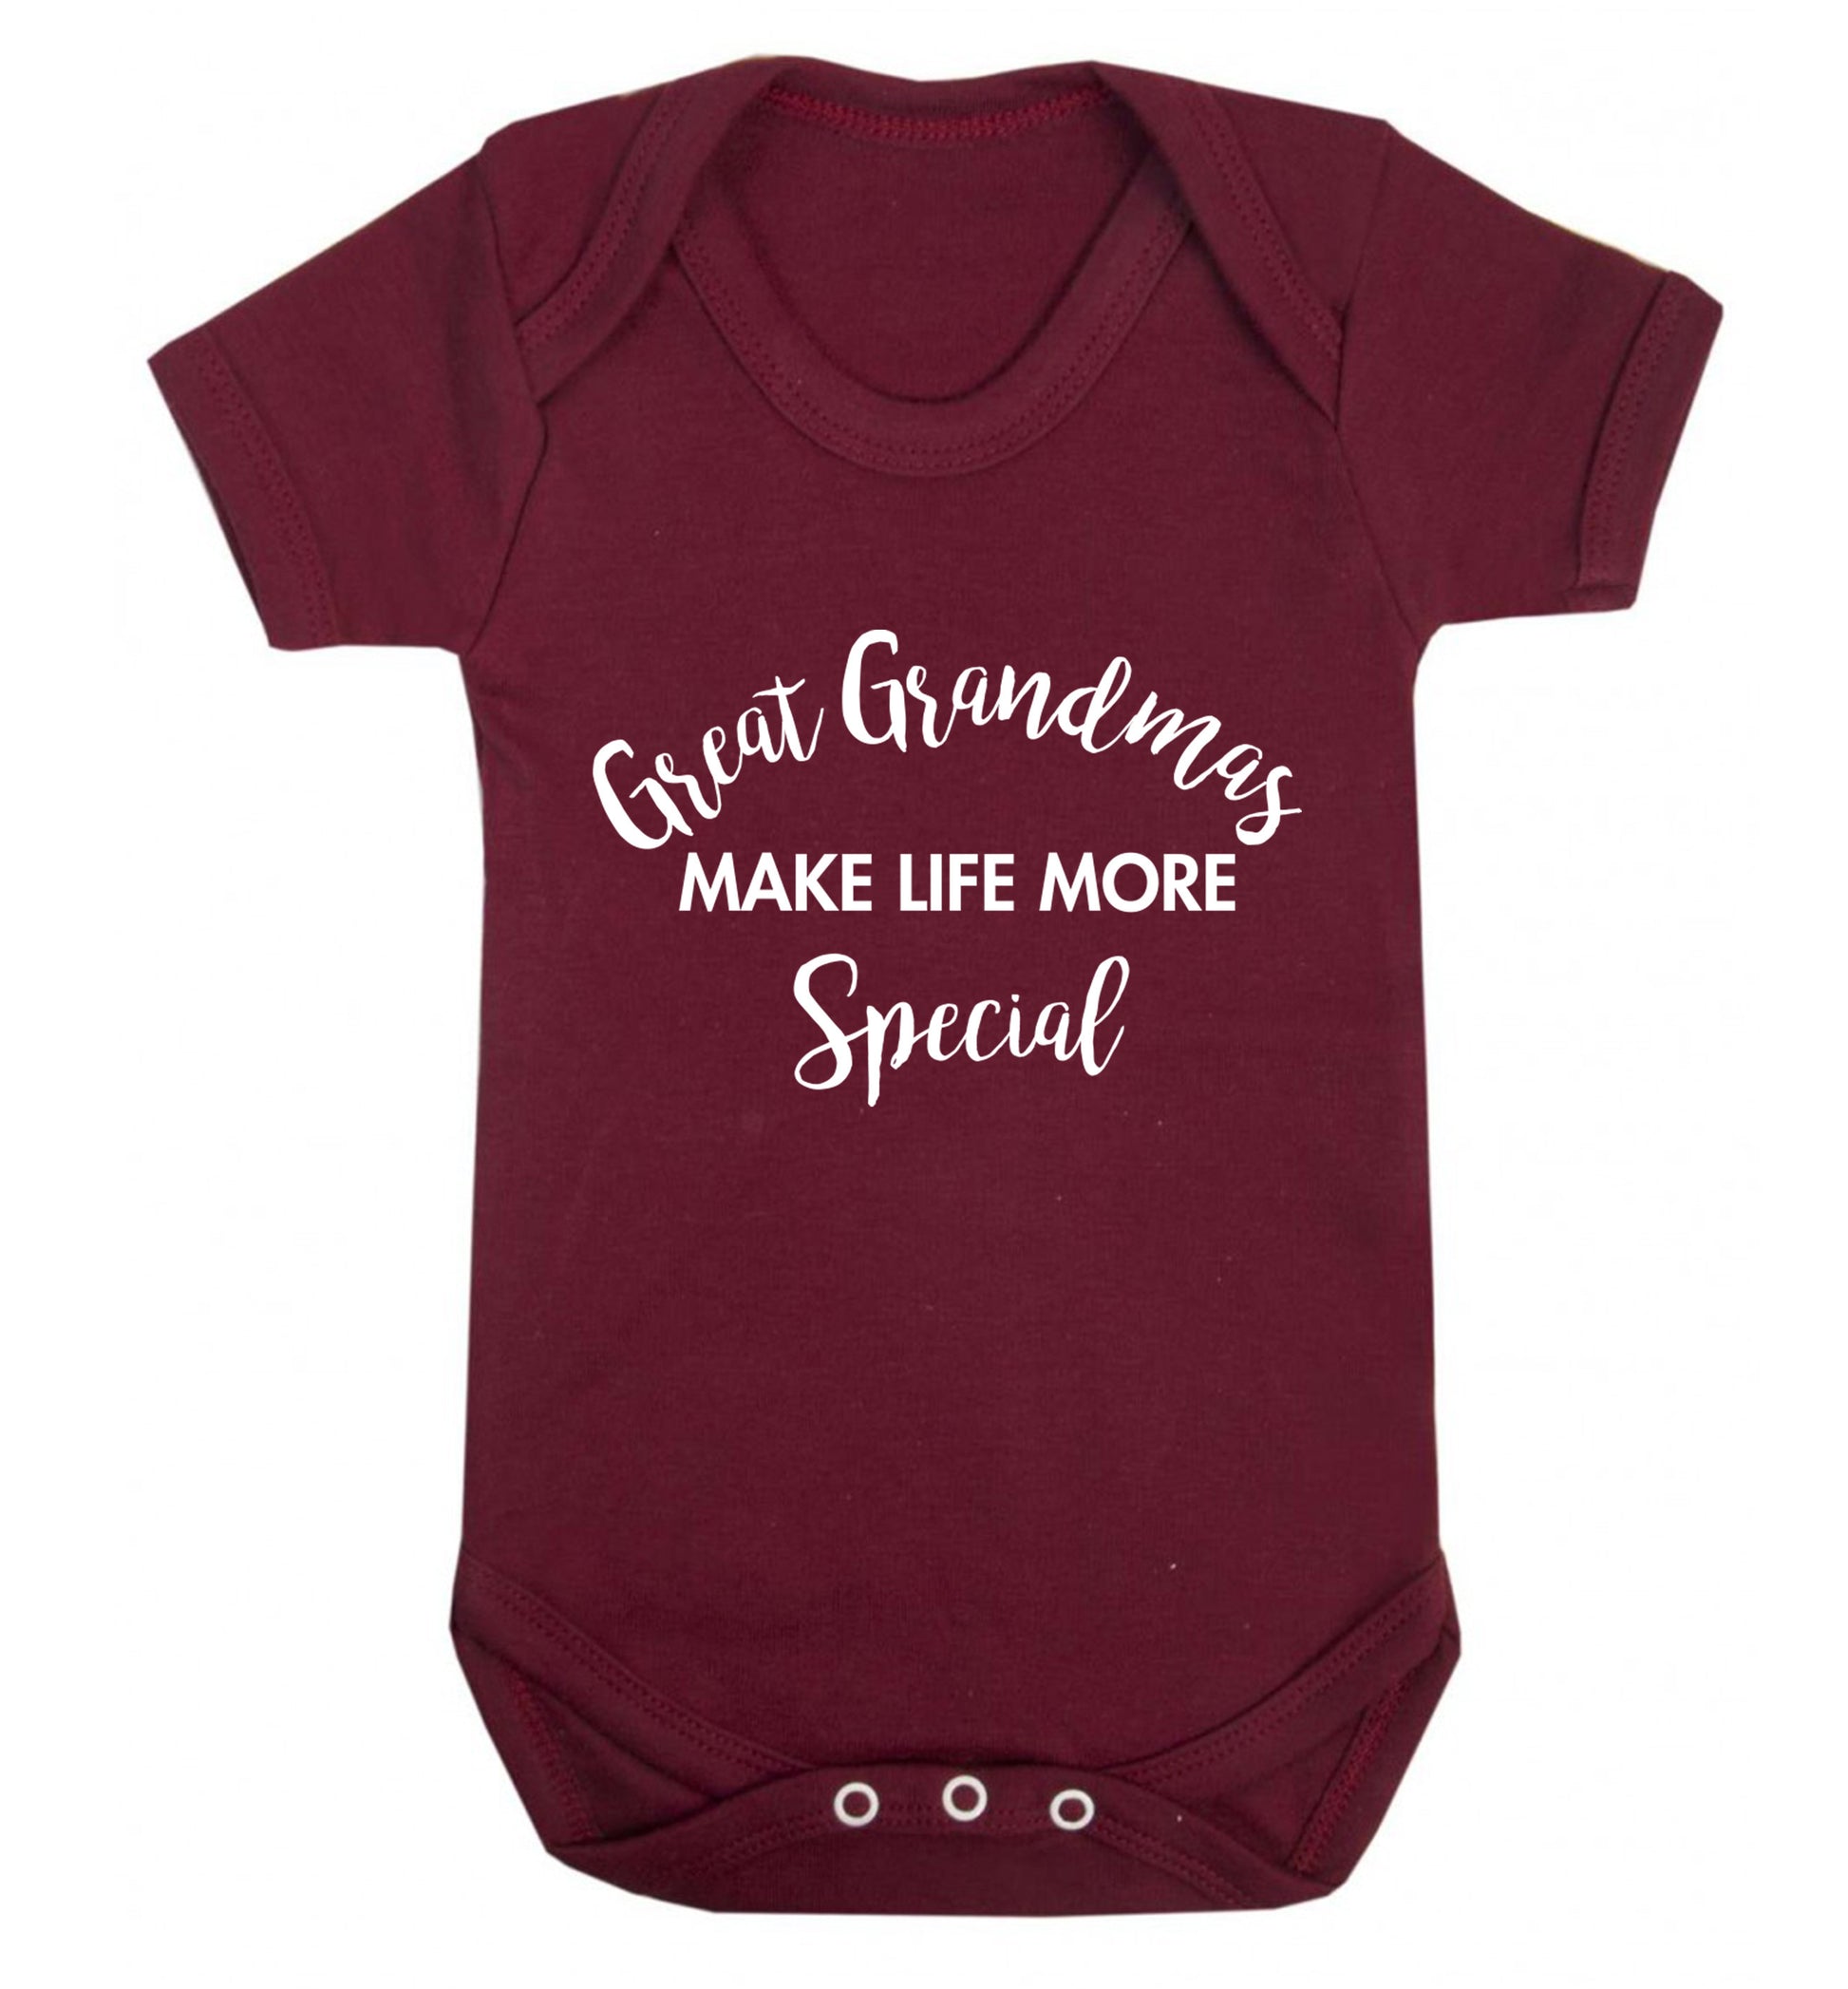 Great Grandmas make life more special Baby Vest maroon 18-24 months